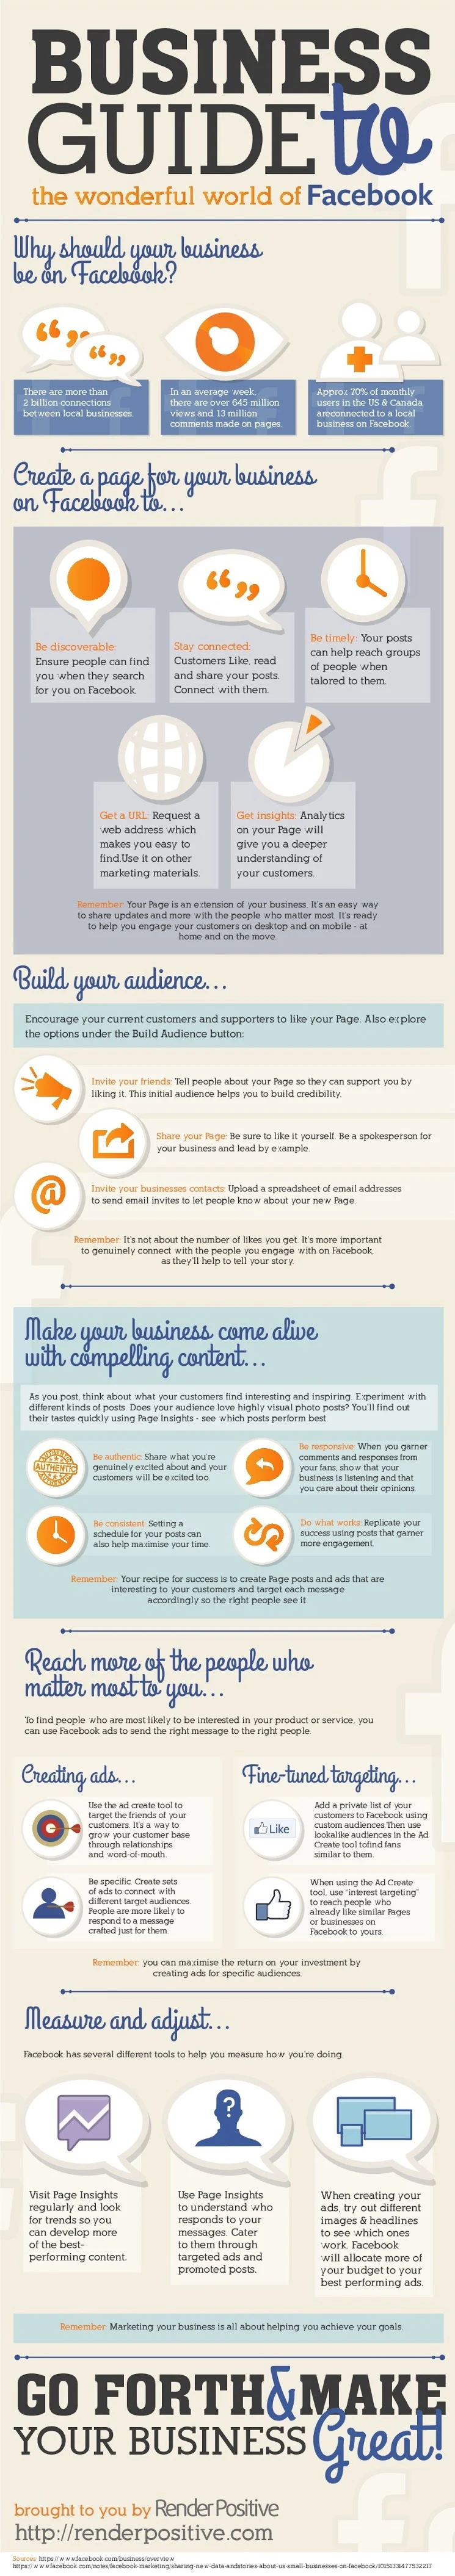 Business Guide To the Wonderful World of Facebook - infographic